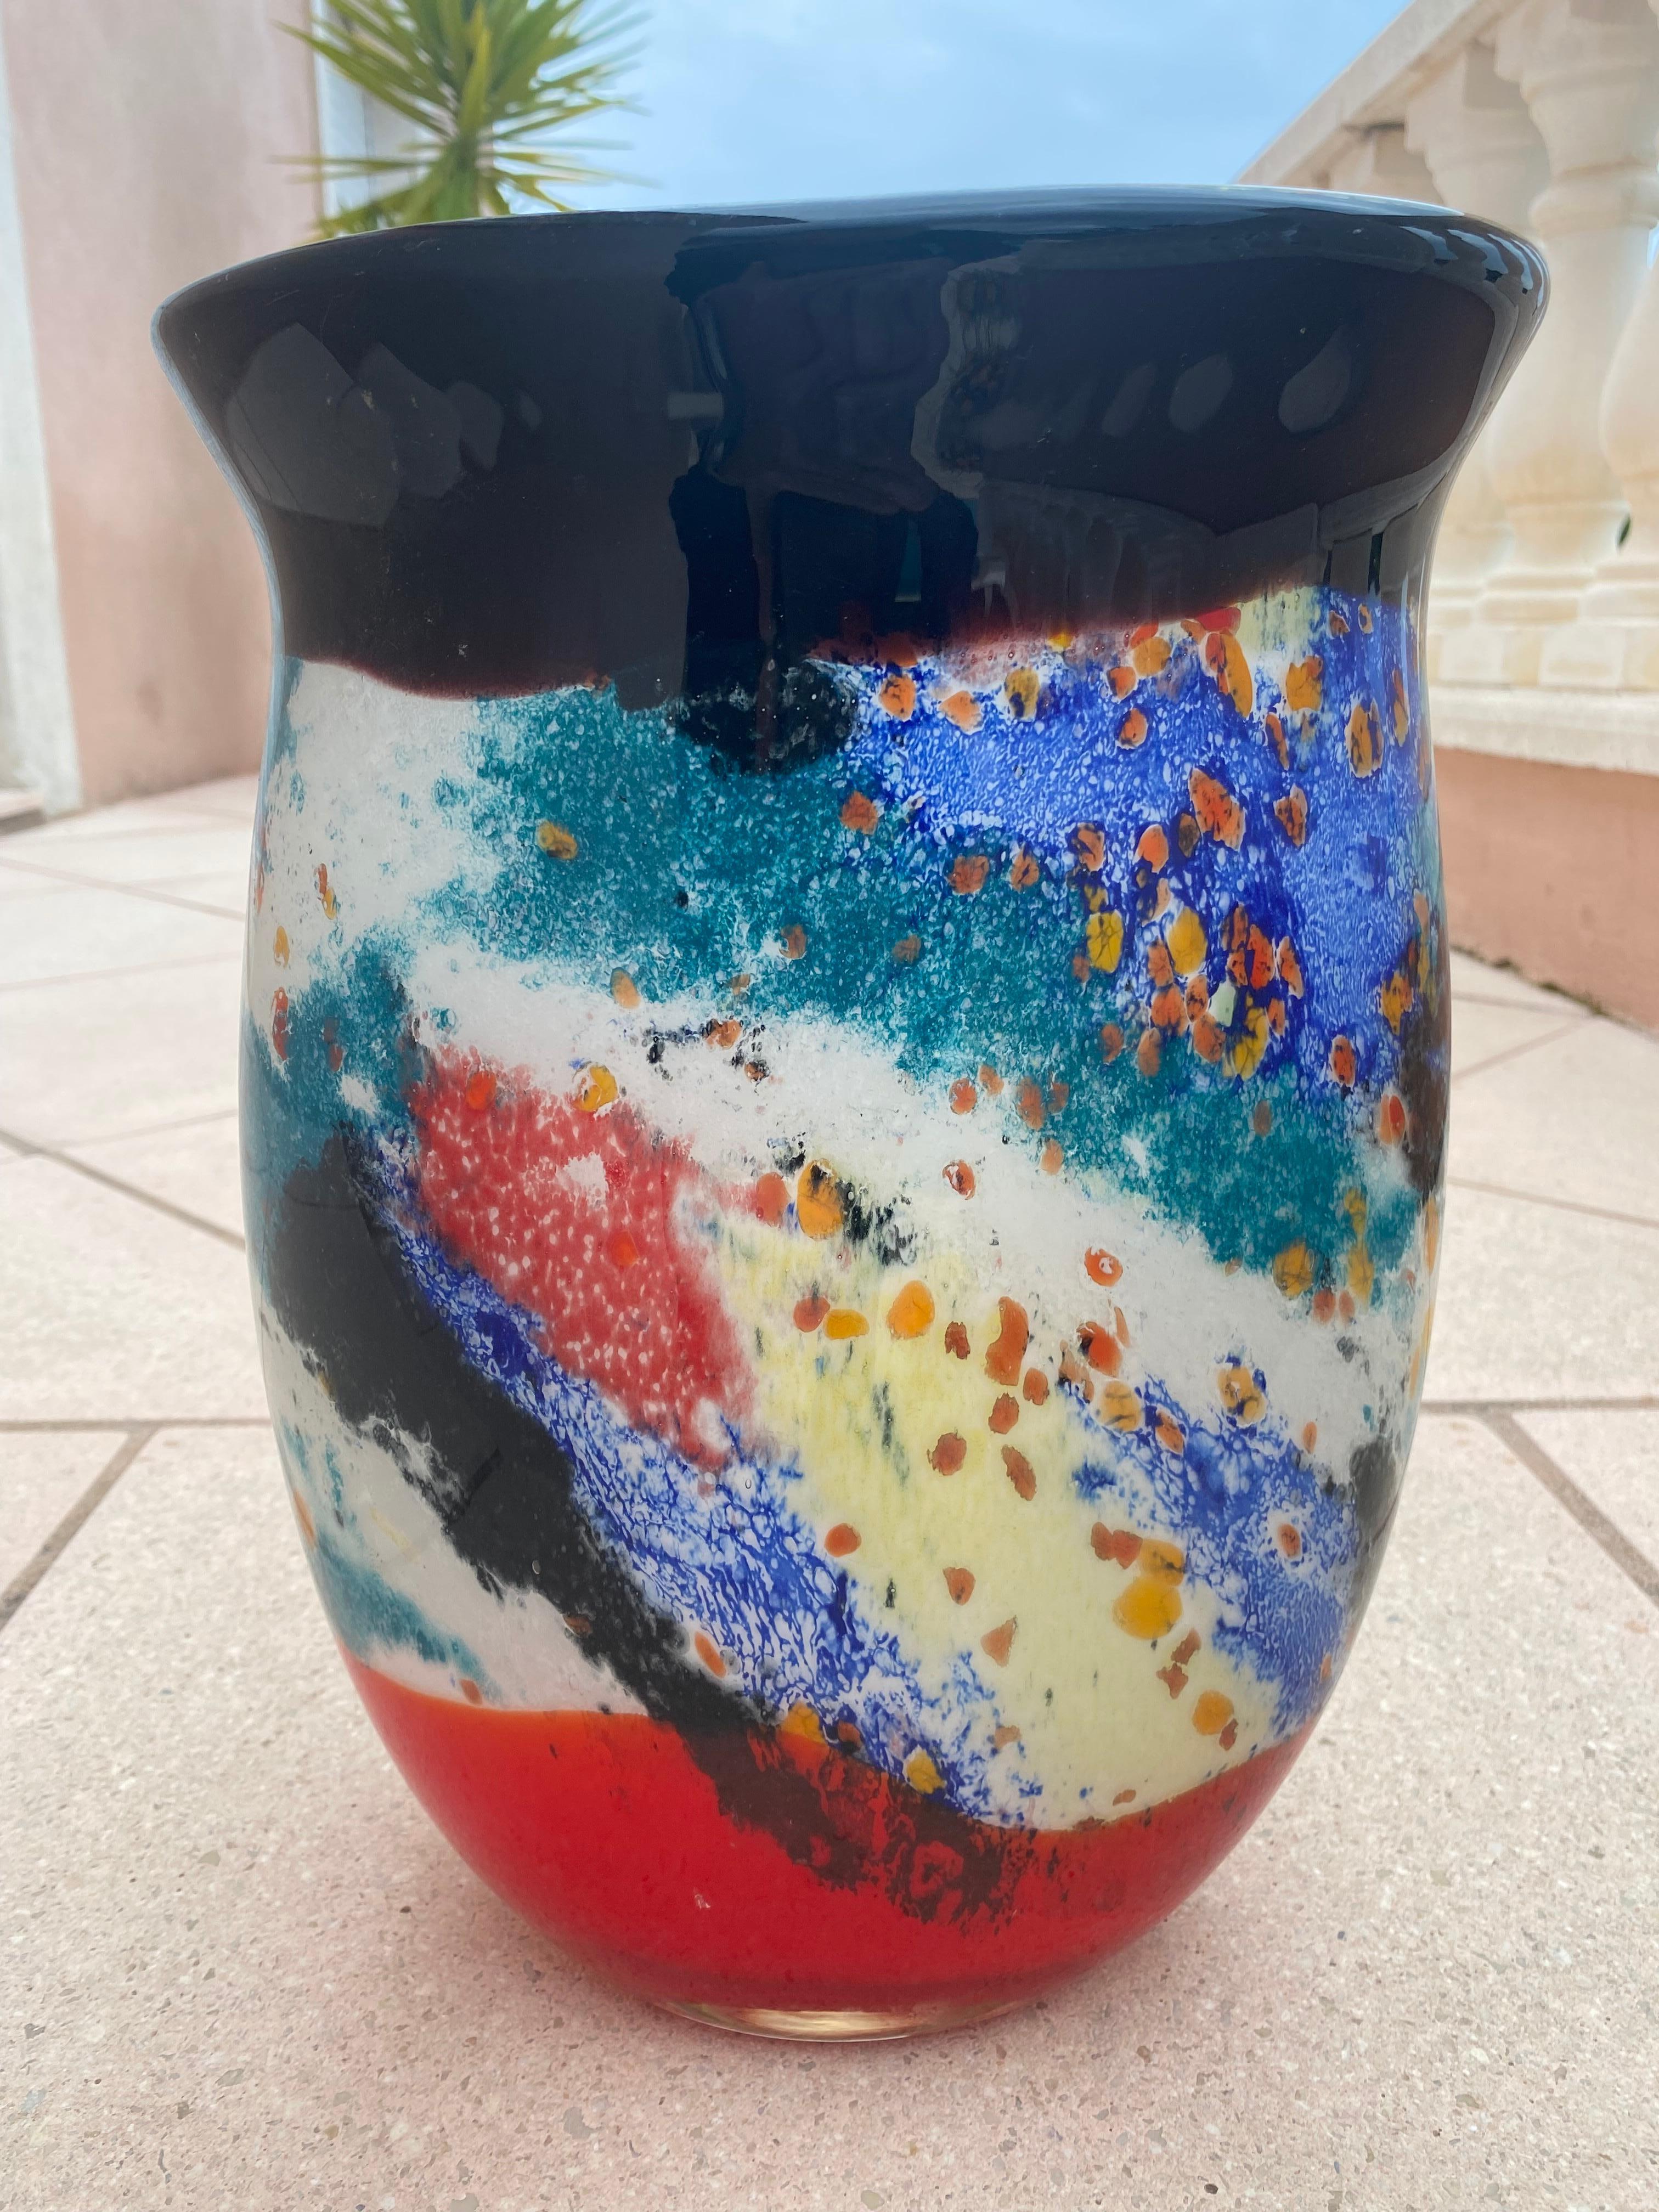 Beautiful multicolored Murano glass vase.
Edition for the year 2000.
Signed Murano and numbered.
Measures: H 33.5 x D 15 x W 25 cms.
In a perfect state.